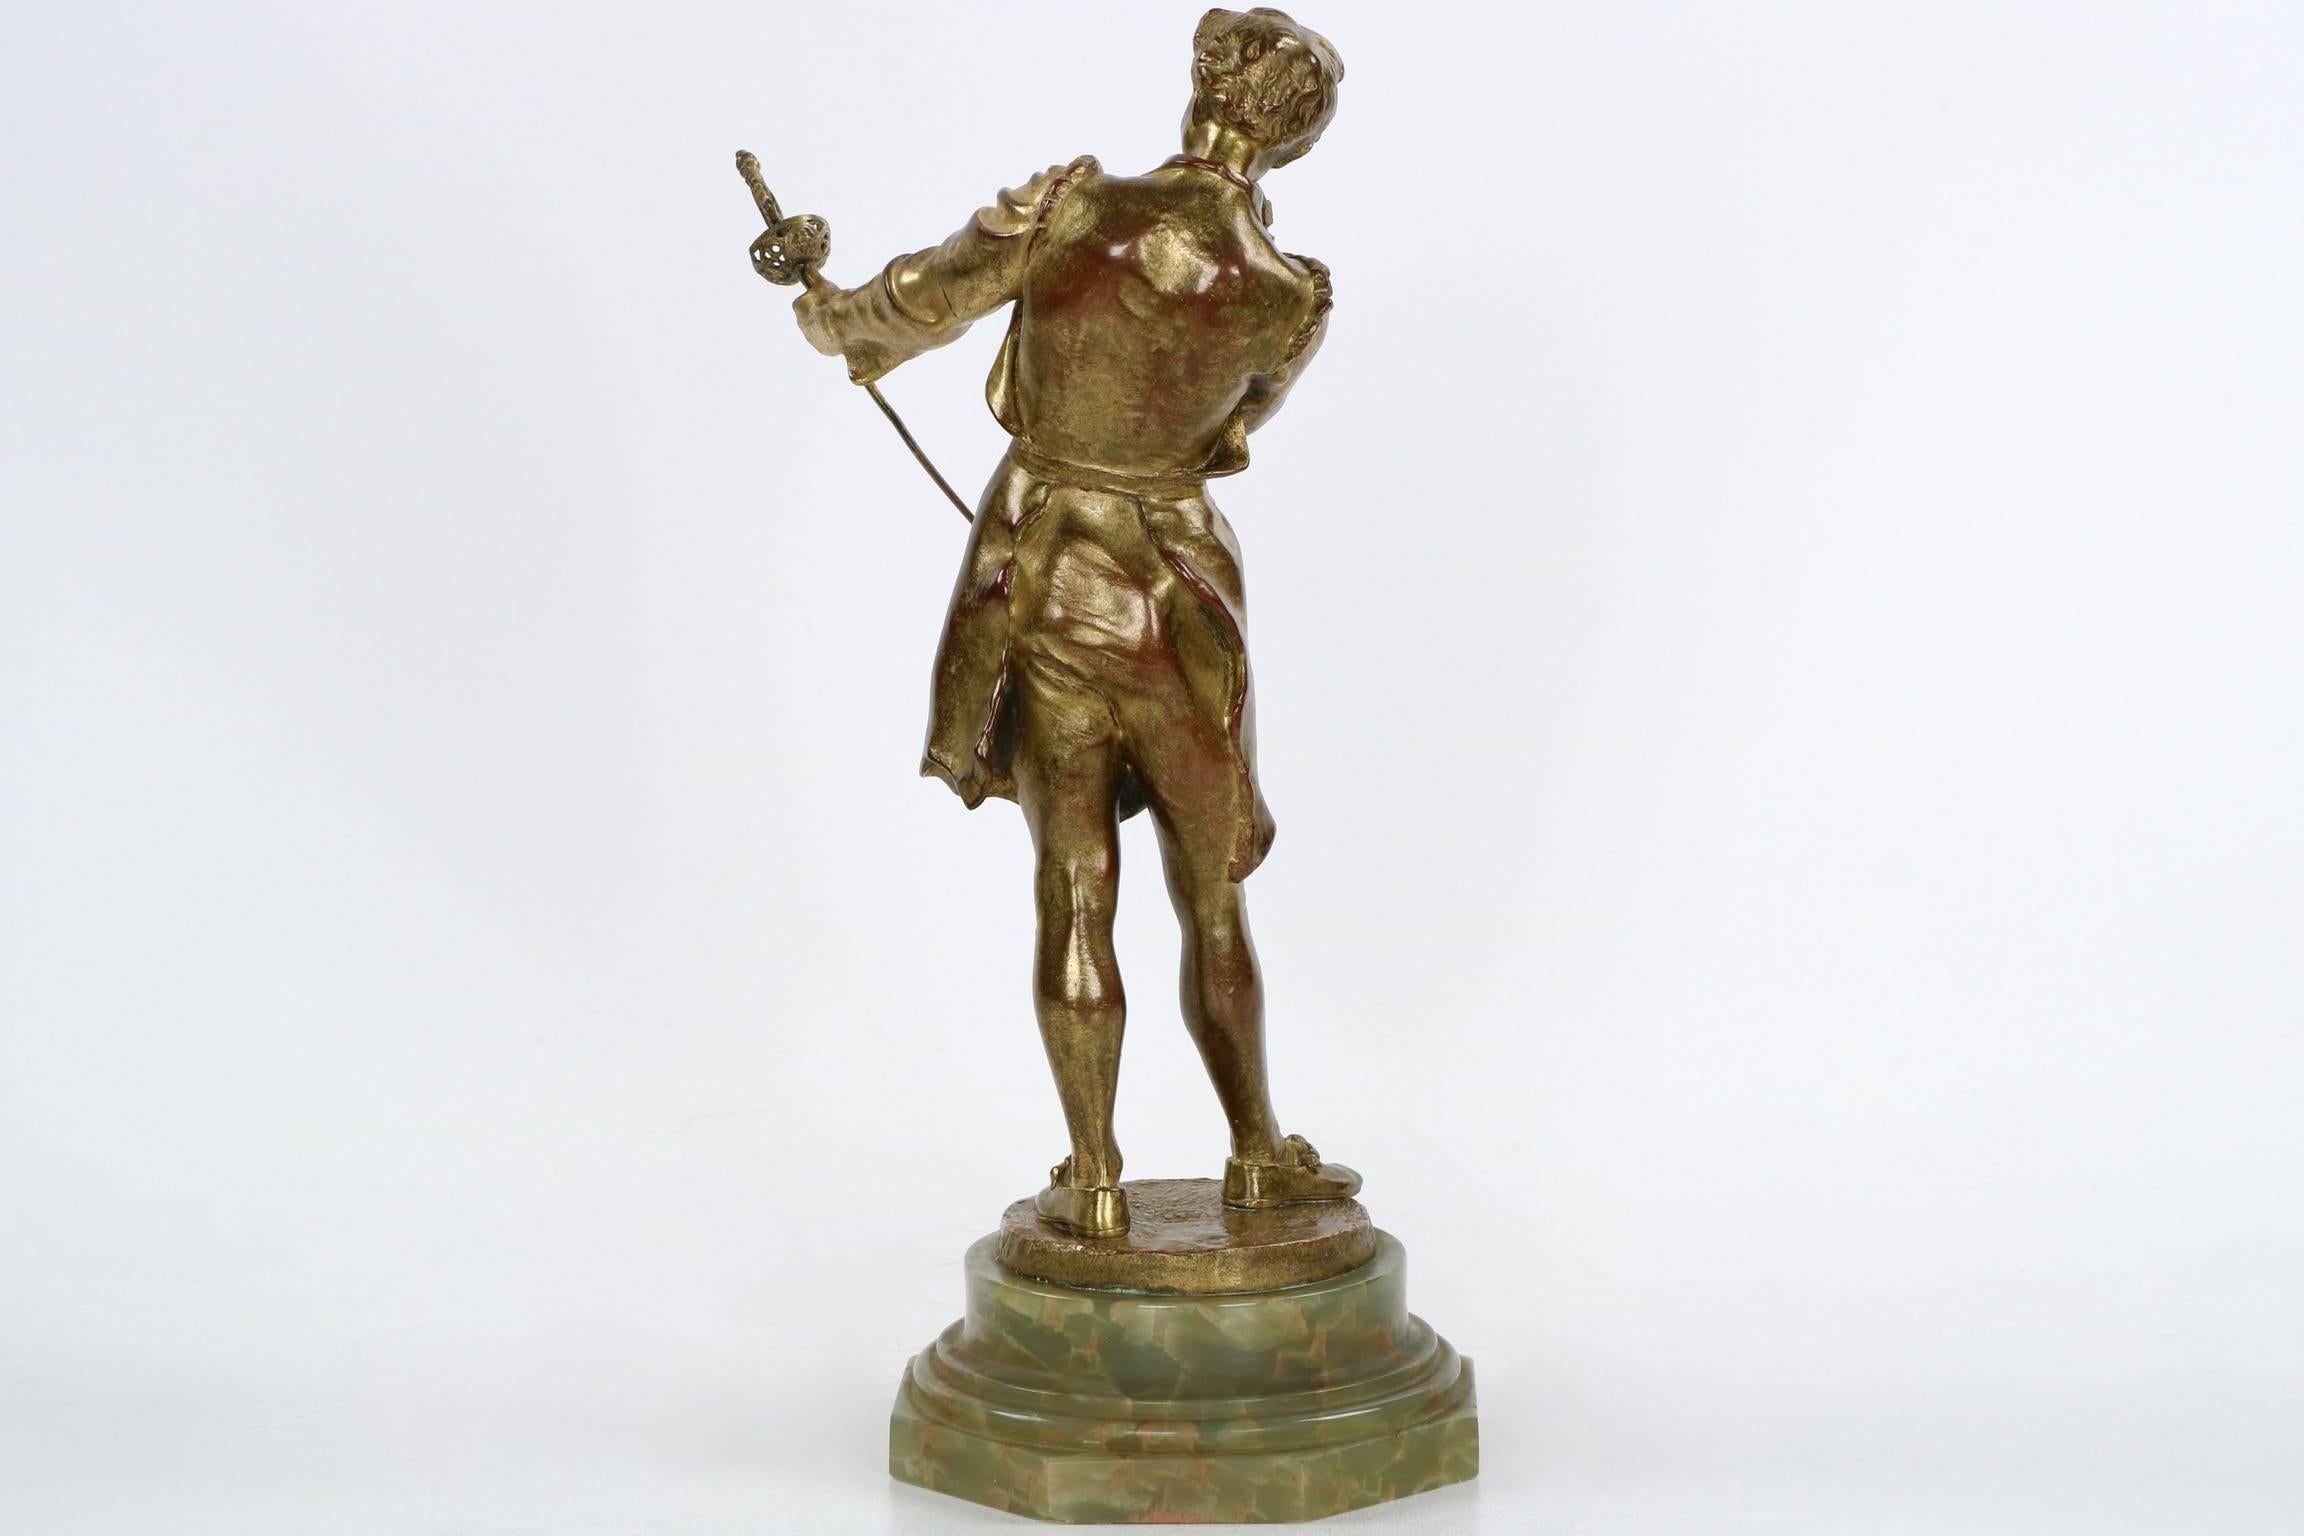 As is typical with works founded by Siot Decauville during the last quarter of the 19th century, this Fine antique gilt bronze sculpture is exceptionally cast and detailed. An original work by Henryk Kossowski Jr., the base is signed “I Kossowski“